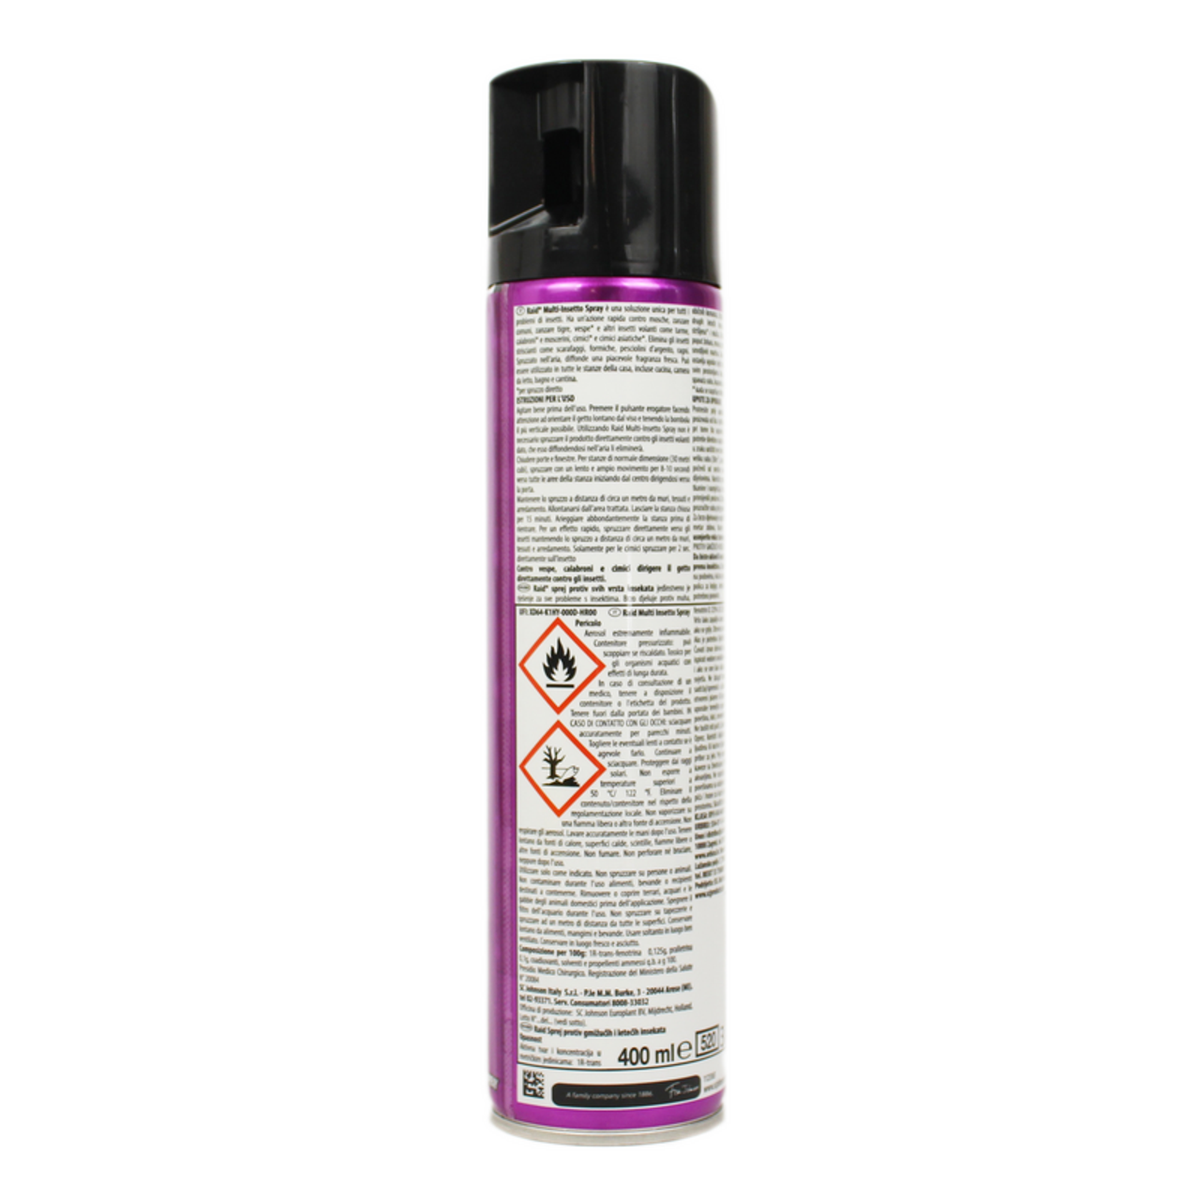 Raid insecticide multi-insectes spray 400 ml